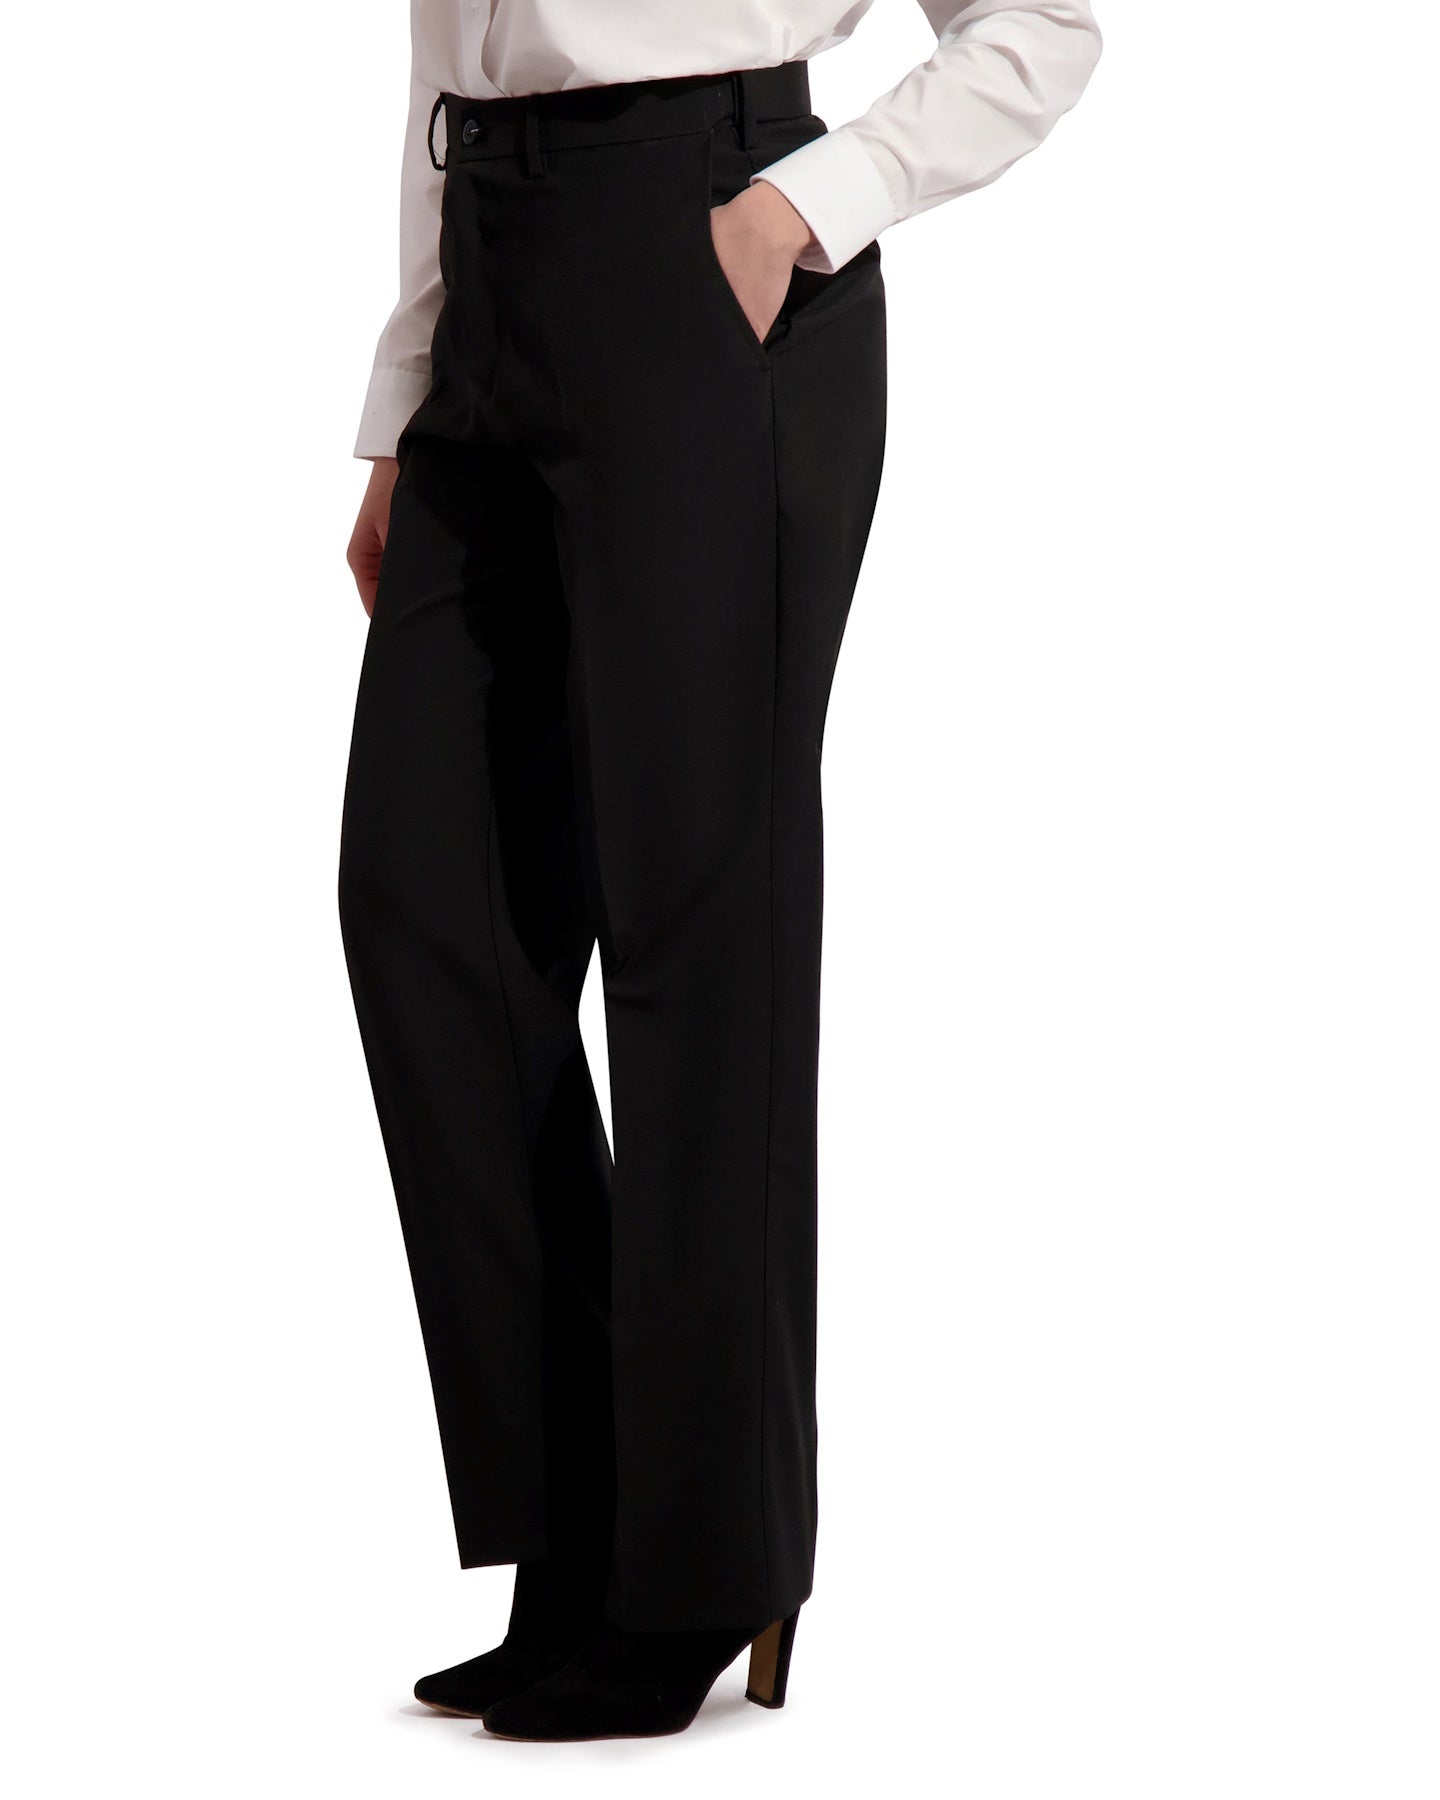 2022 Spring Autumn Womens Herringbone Woolen Wide Leg Pants High Waist  Straight Next Wide Leg Trousers For Slim Fit Suit From T_shop008, $35.15 |  DHgate.Com